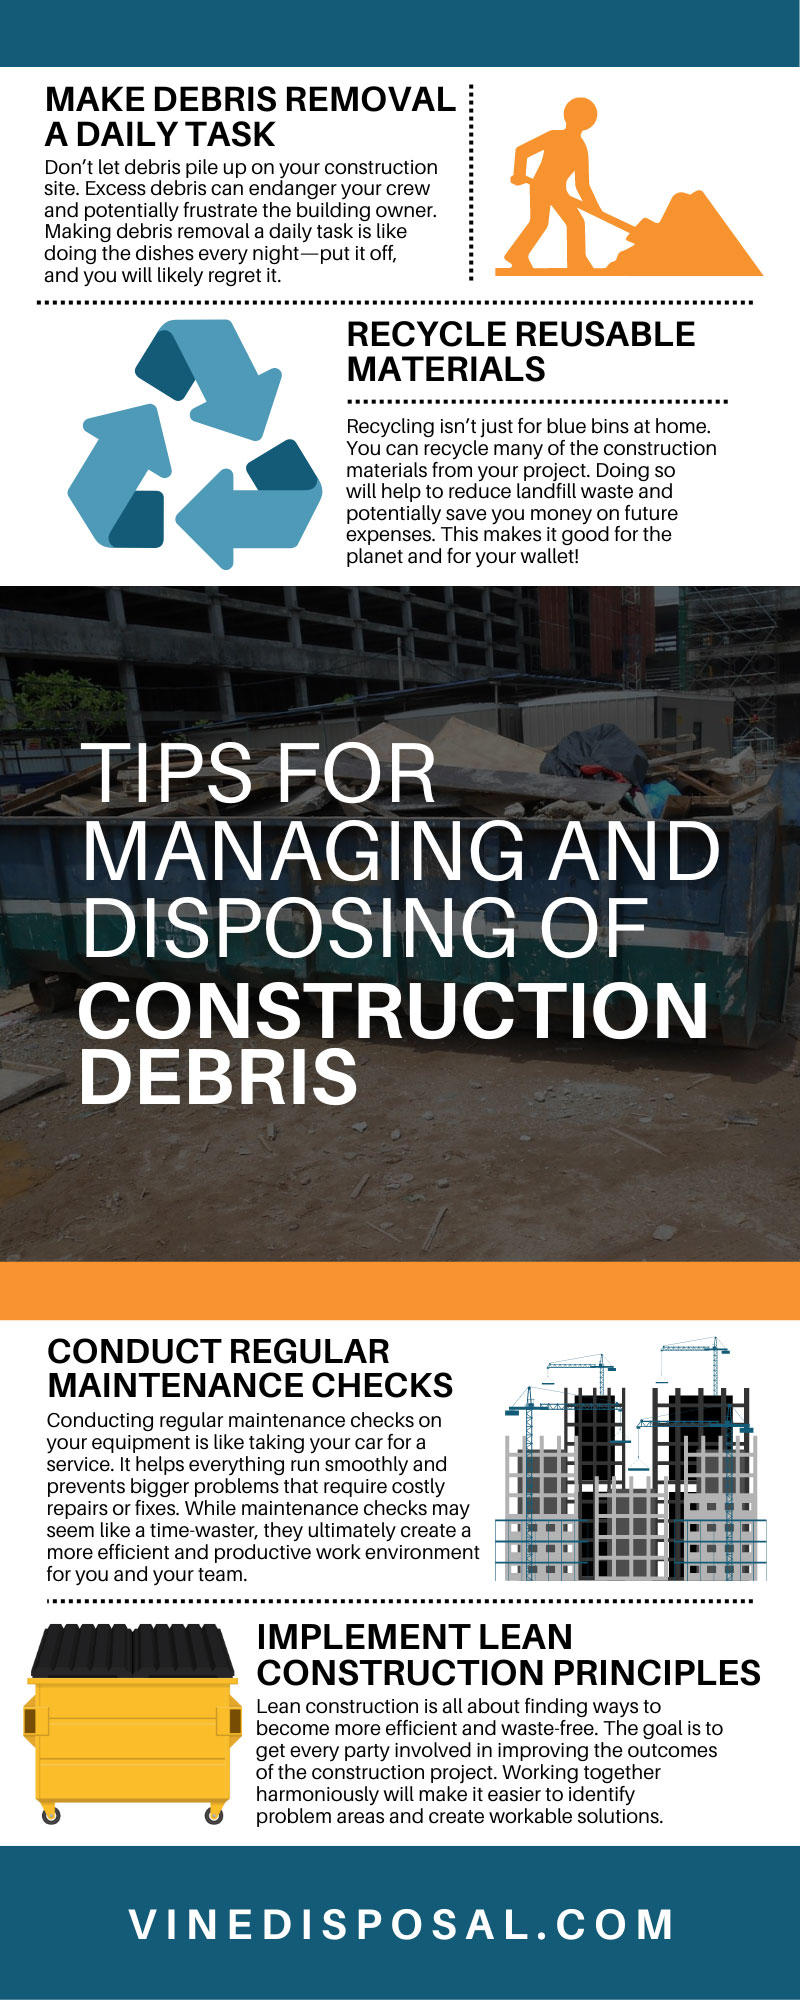 12 Tips for Managing and Disposing of Construction Debris